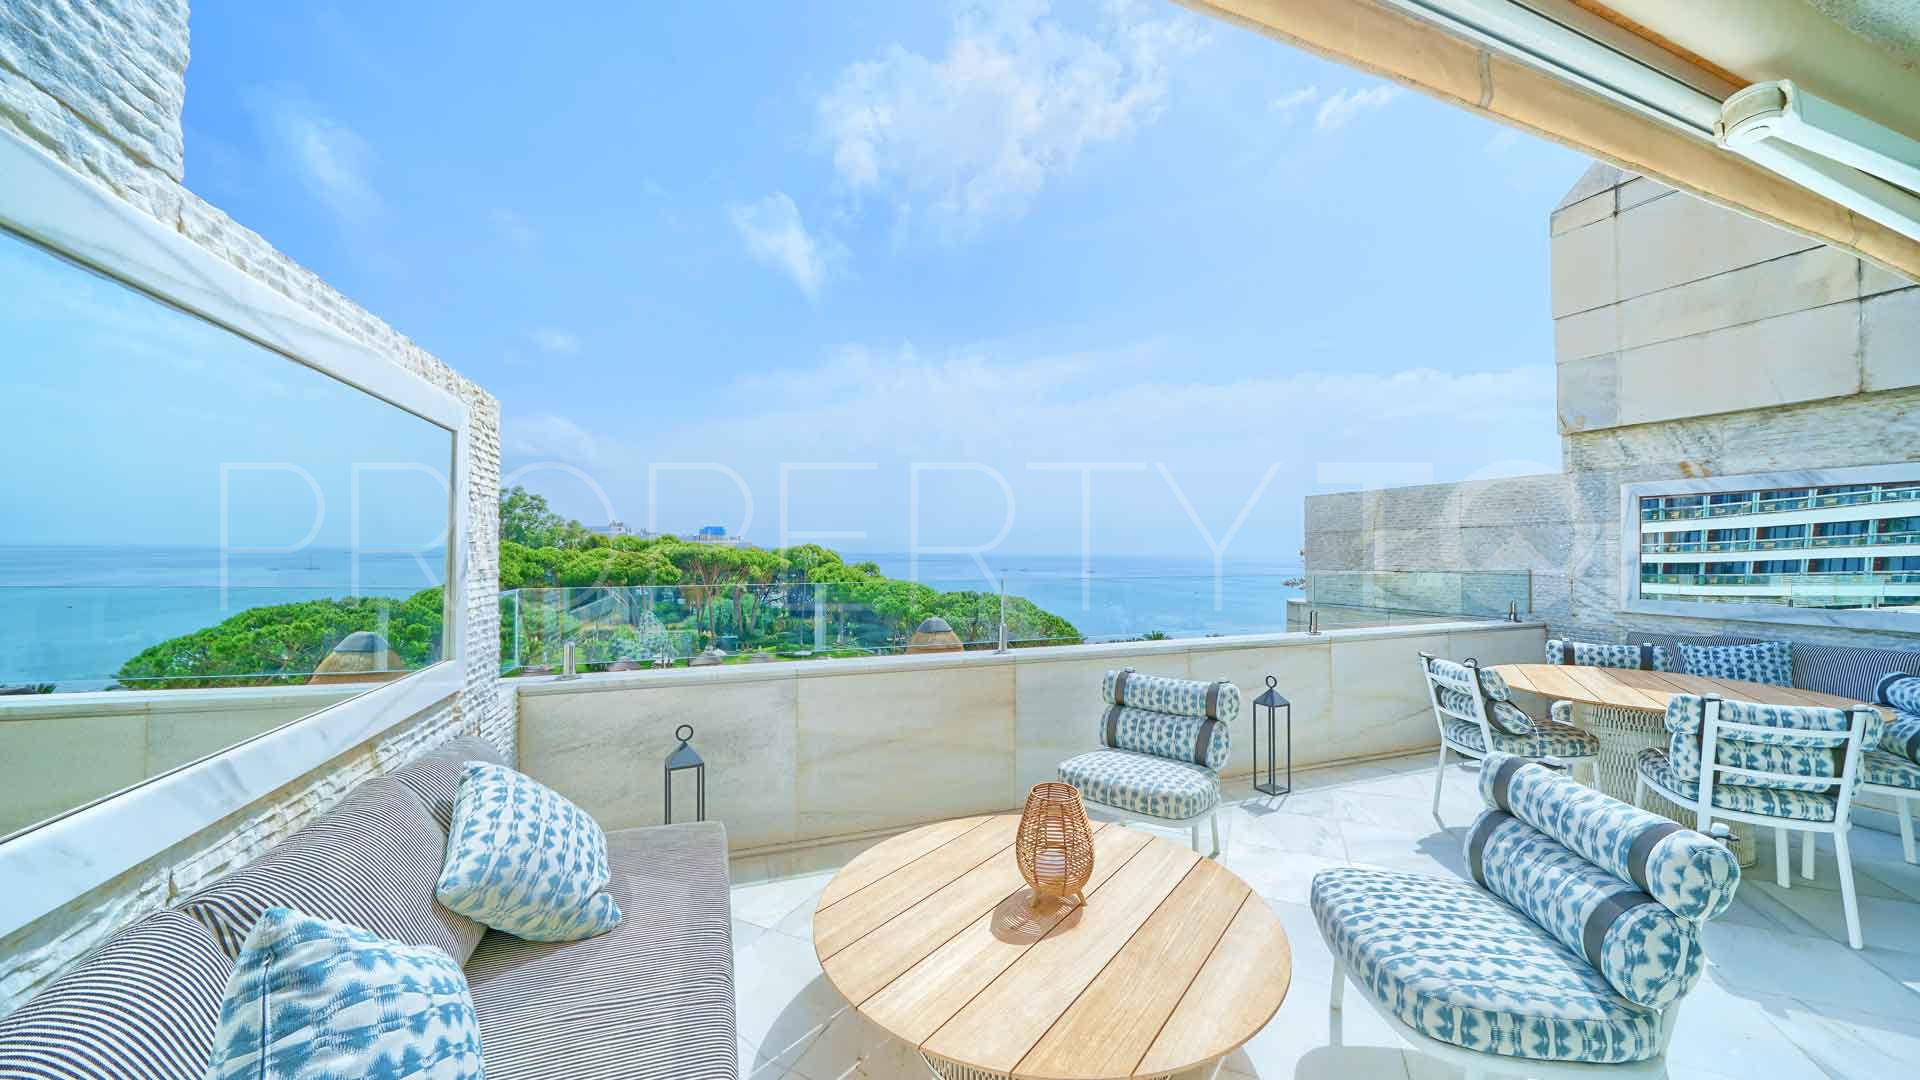 Marina Mariola 3 bedrooms penthouse for sale